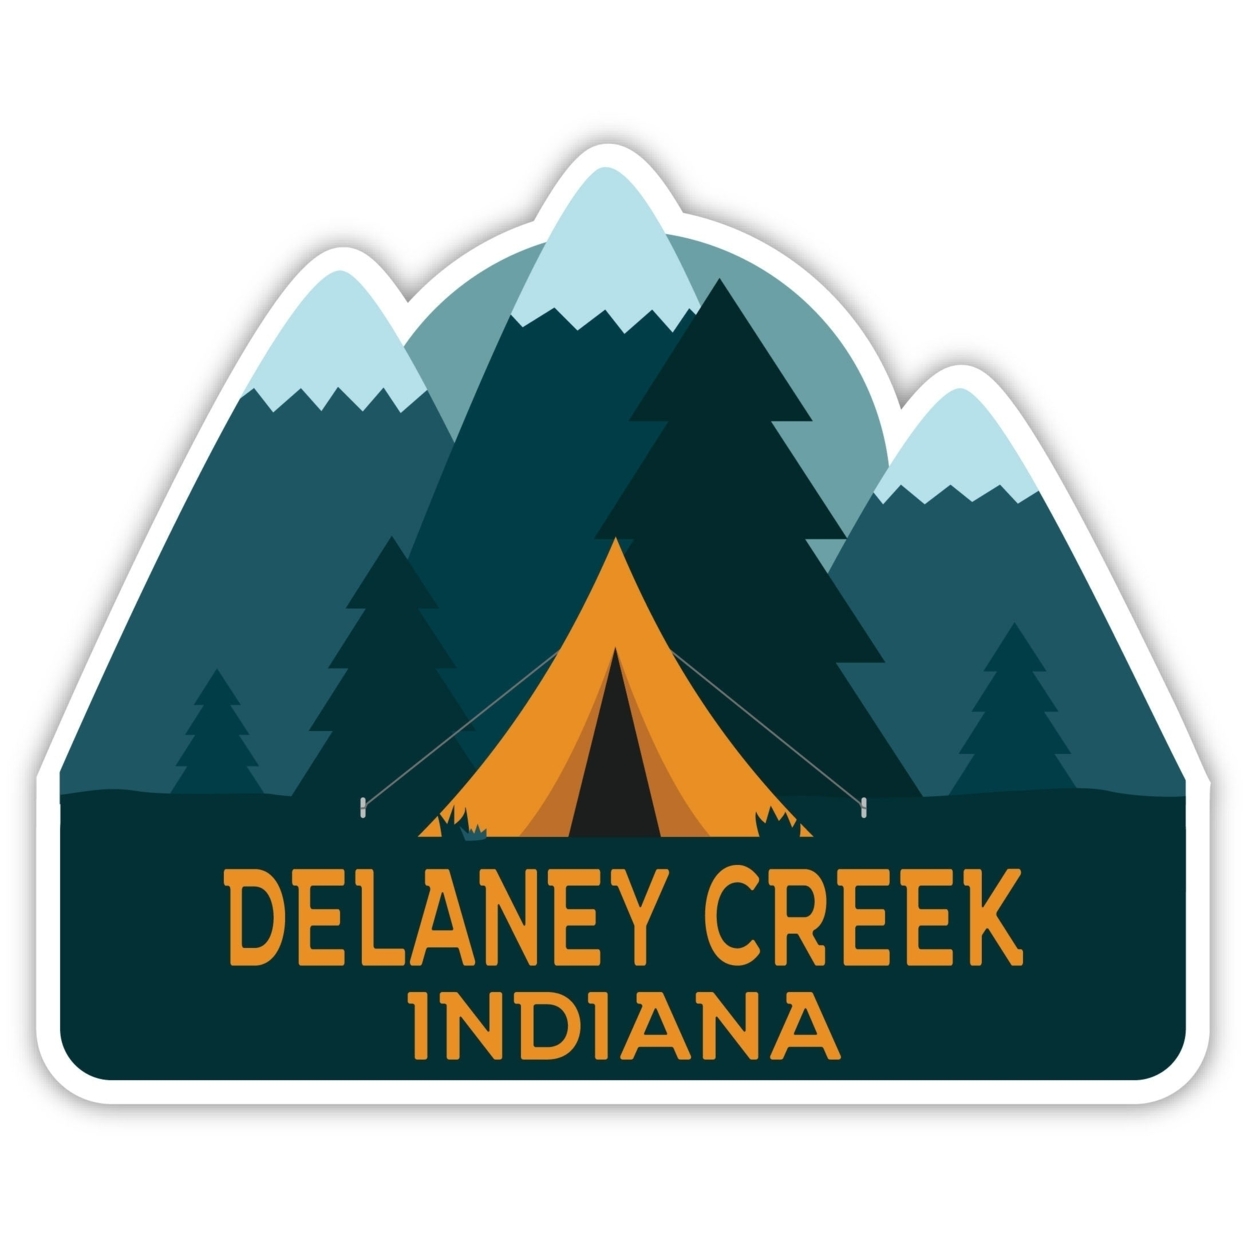 Delaney Creek Indiana Souvenir Decorative Stickers (Choose Theme And Size) - 4-Pack, 10-Inch, Tent